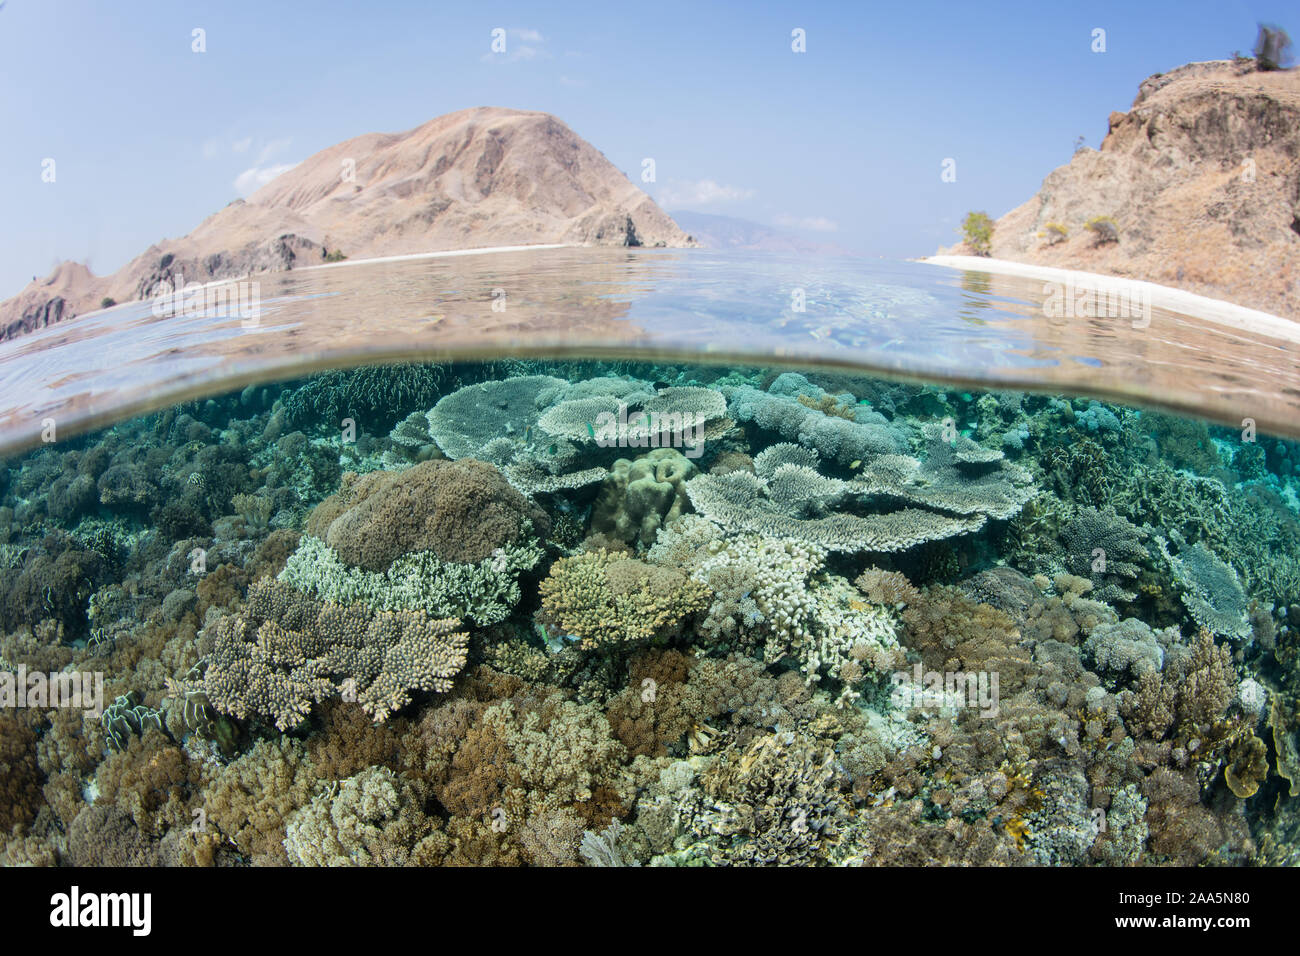 An amazing coral reef thrives in Komodo National Park, Indonesia. This tropical area is known for its extraordinary marine biodiversity. Stock Photo